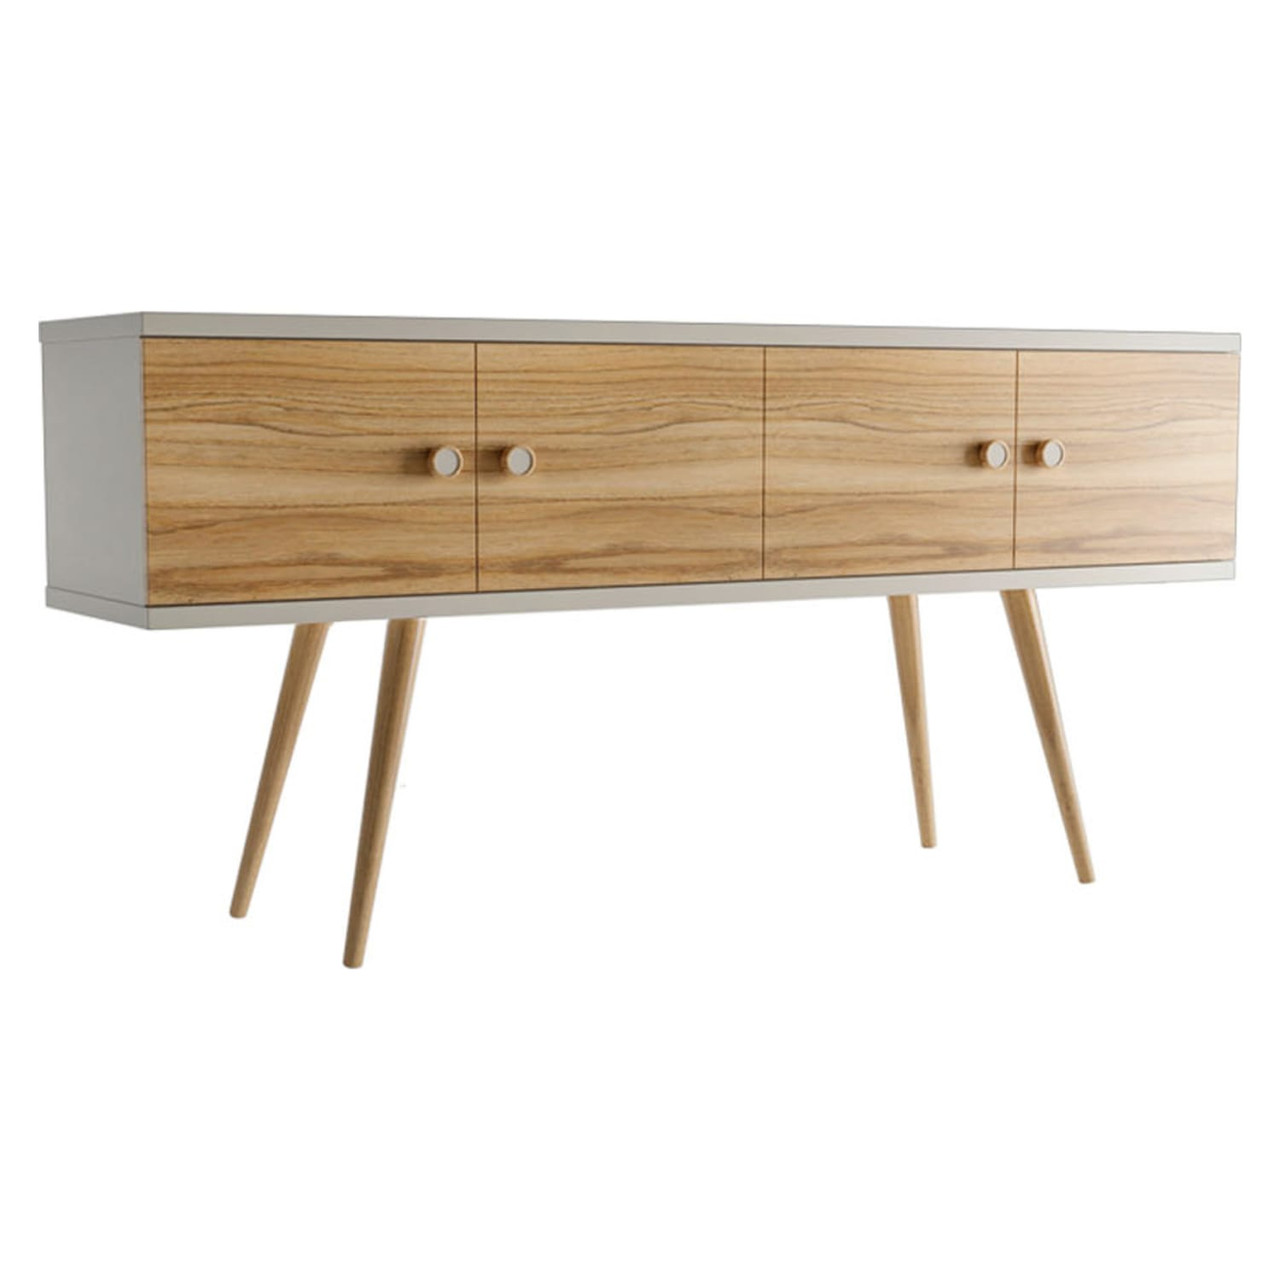 Theodore 60.0” Sideboard in Off White and Cinnamon